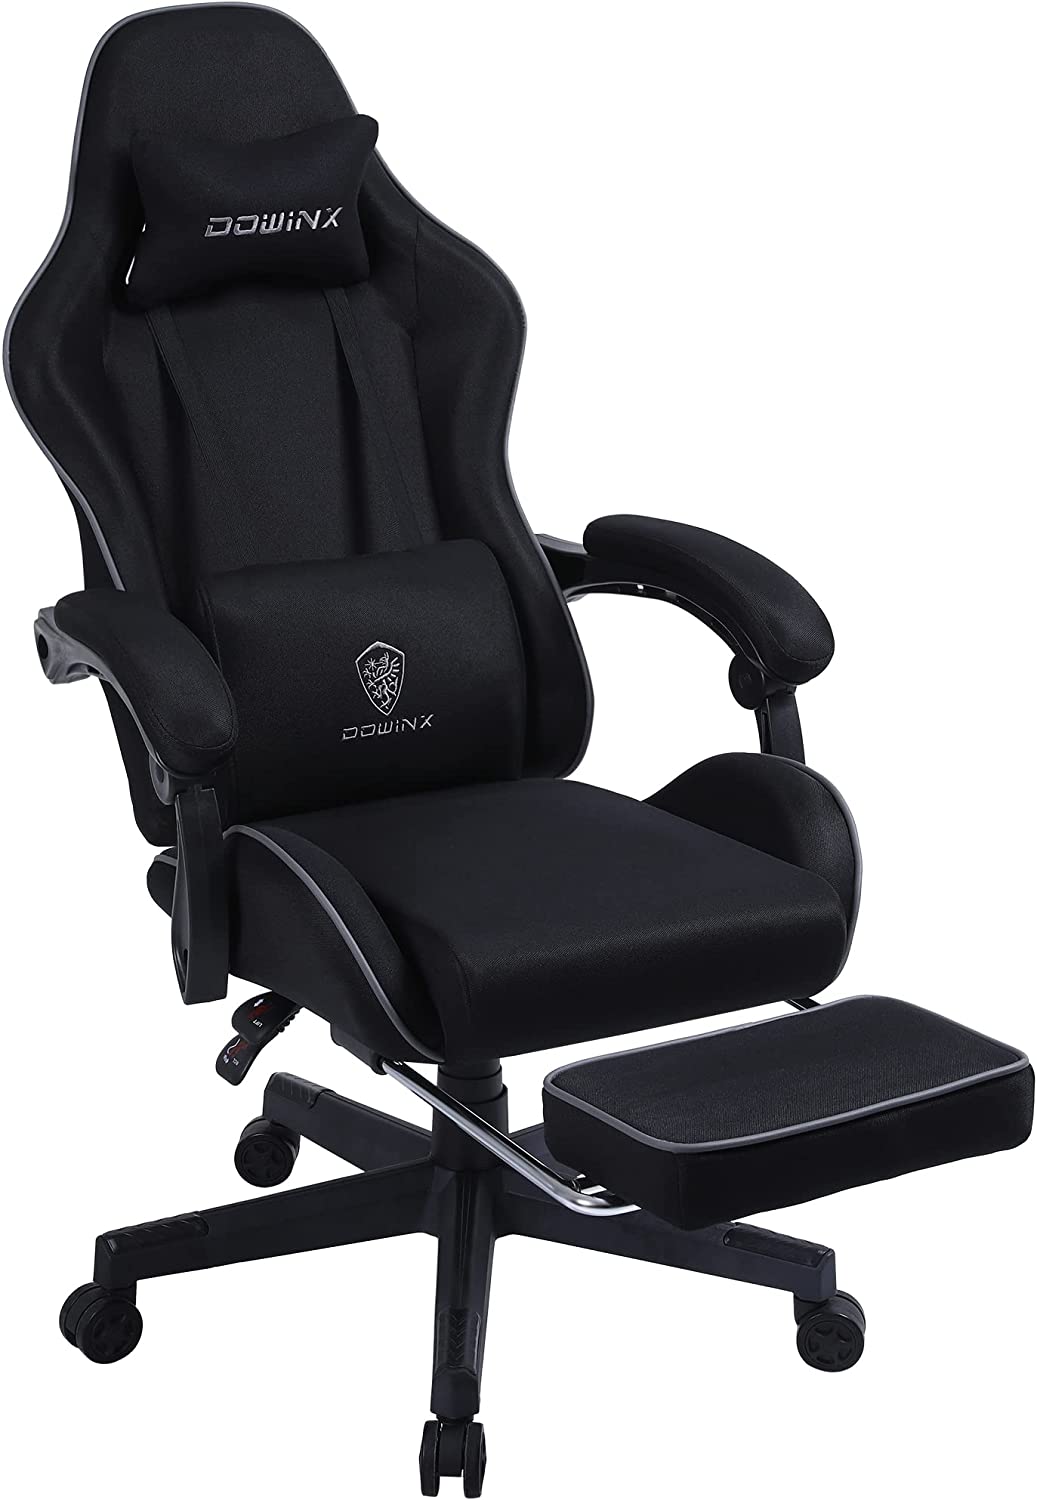 Dowinx Gaming Chair Fabric with Pocket Spring Cushion Black